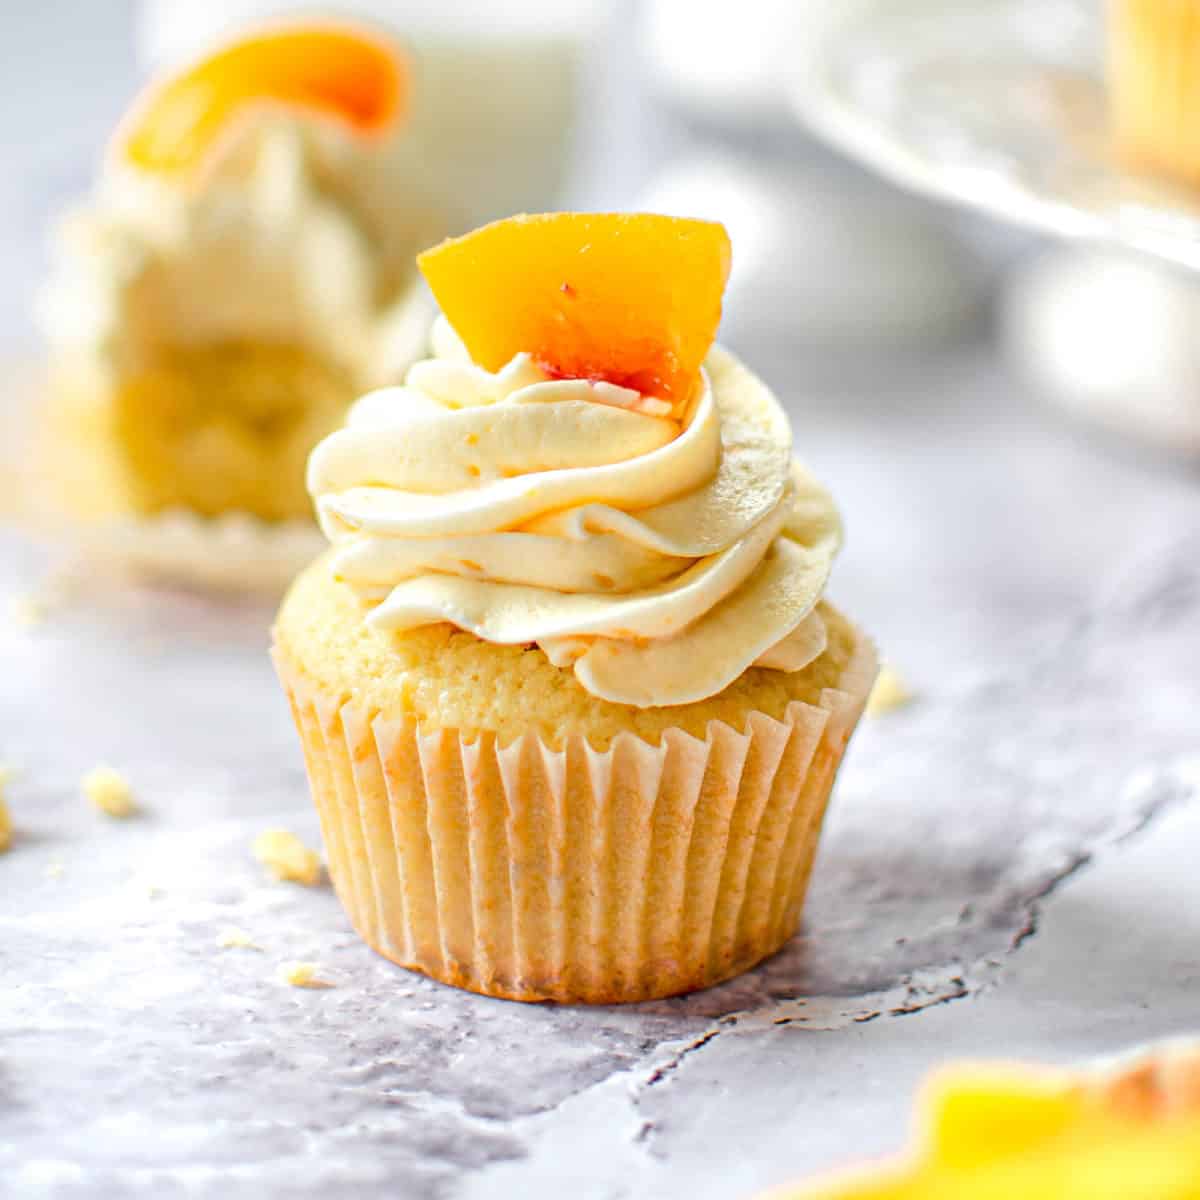 Close up of cupcake topped with a fresh peach.